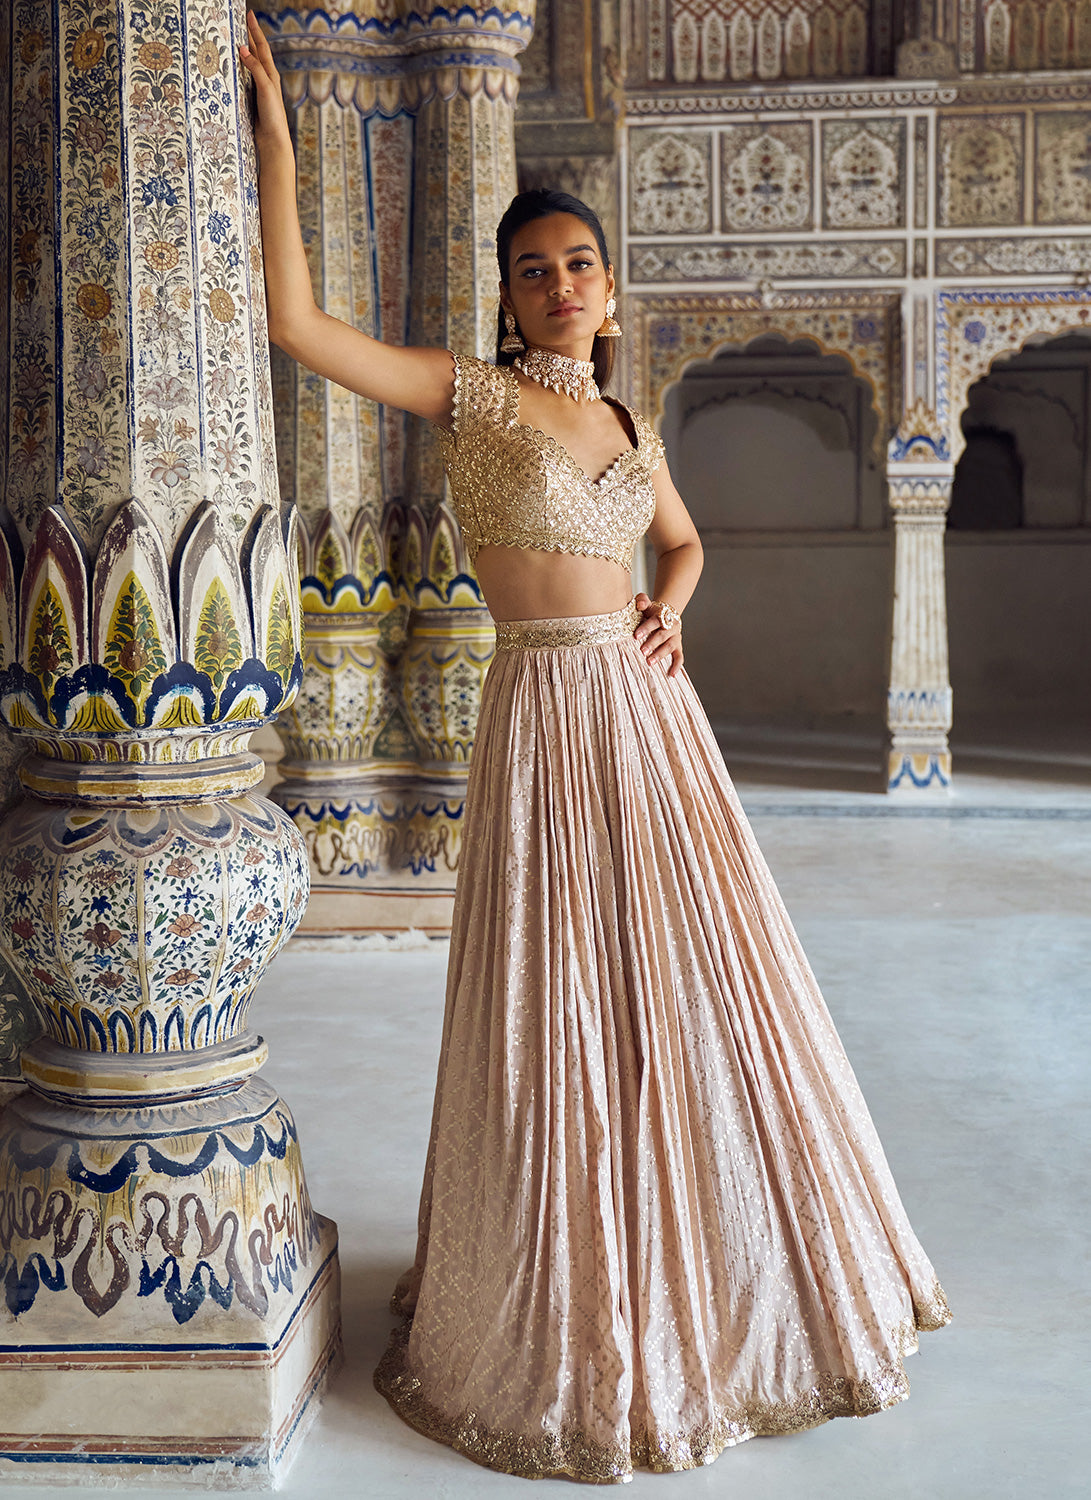 How to Style Lehenga Skirt With A Crop Top For Mehendi Functions | Lehenga  skirt, Mehendi outfits, Embroidered crop tops